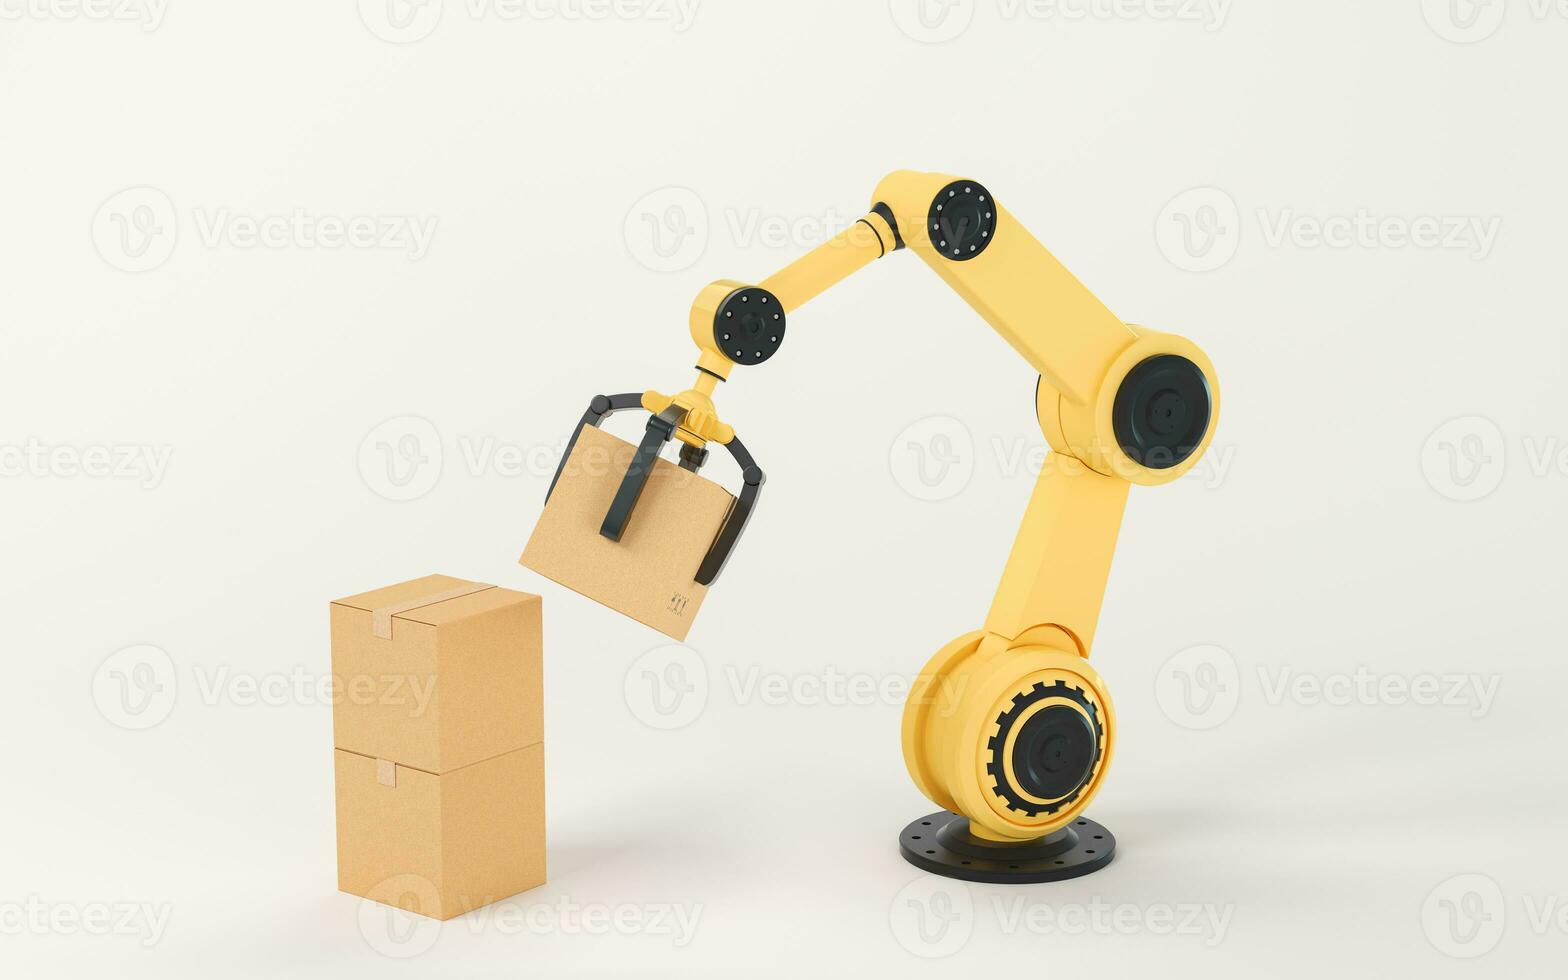 The robotic arm picks up the box, 3d rendering. photo